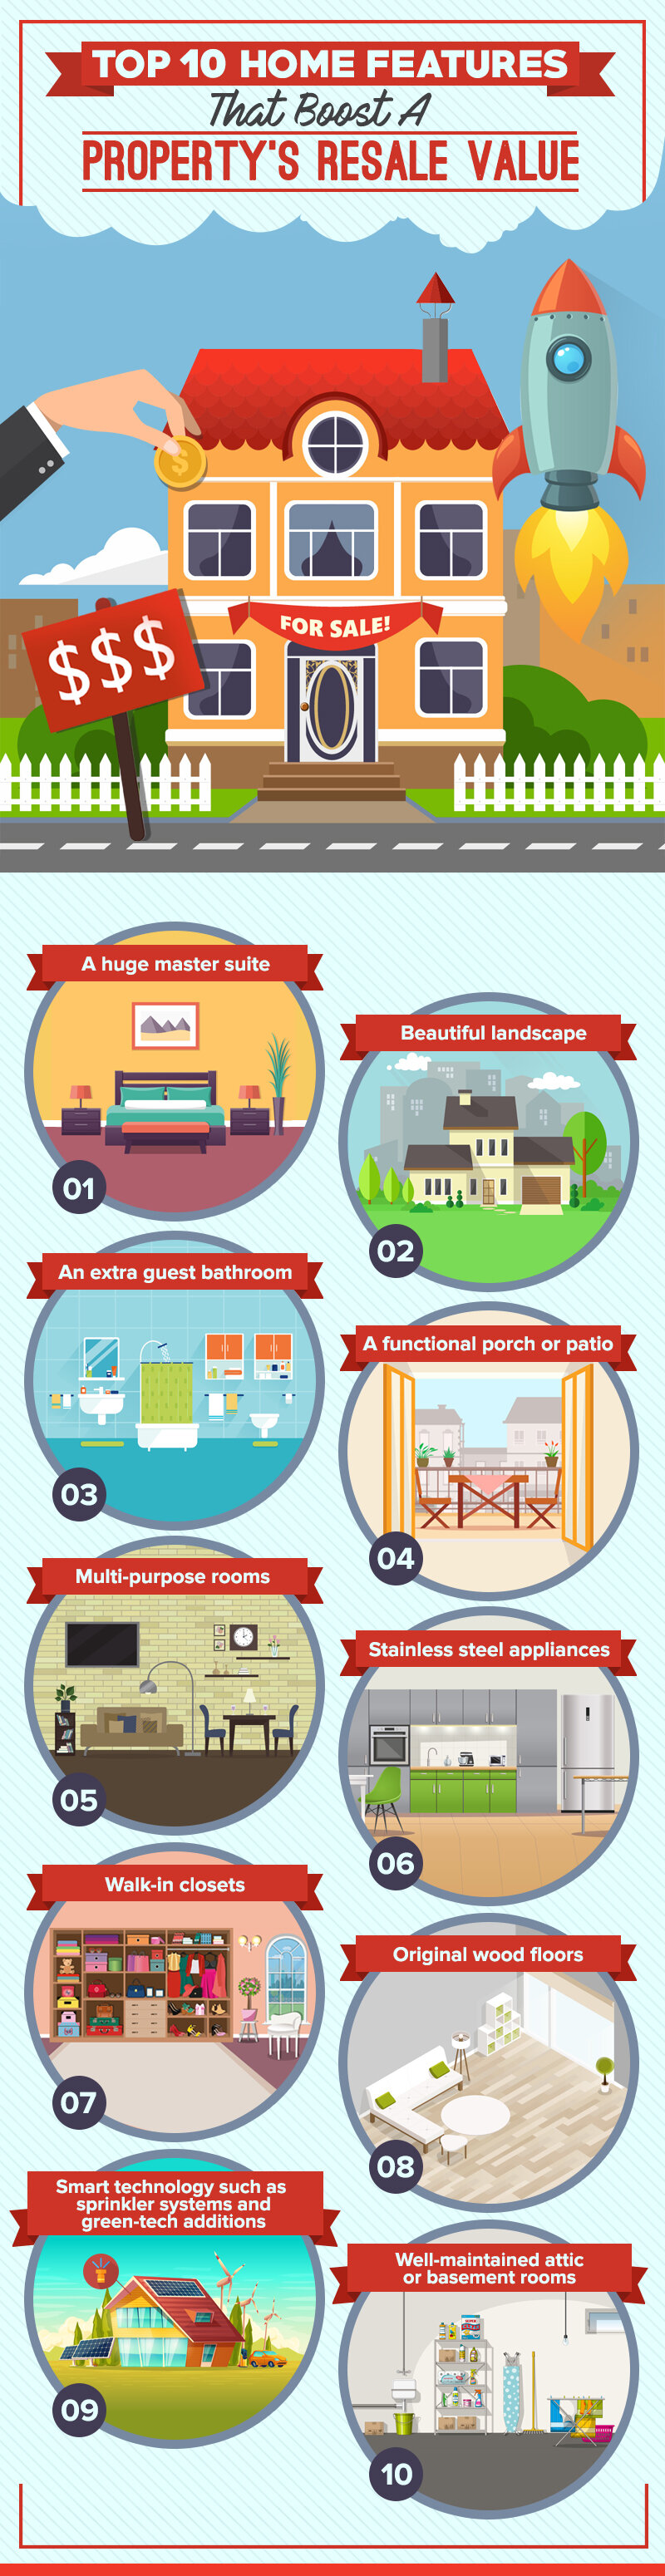 Top 10 Home Features That Boosts A Property's Resale Value